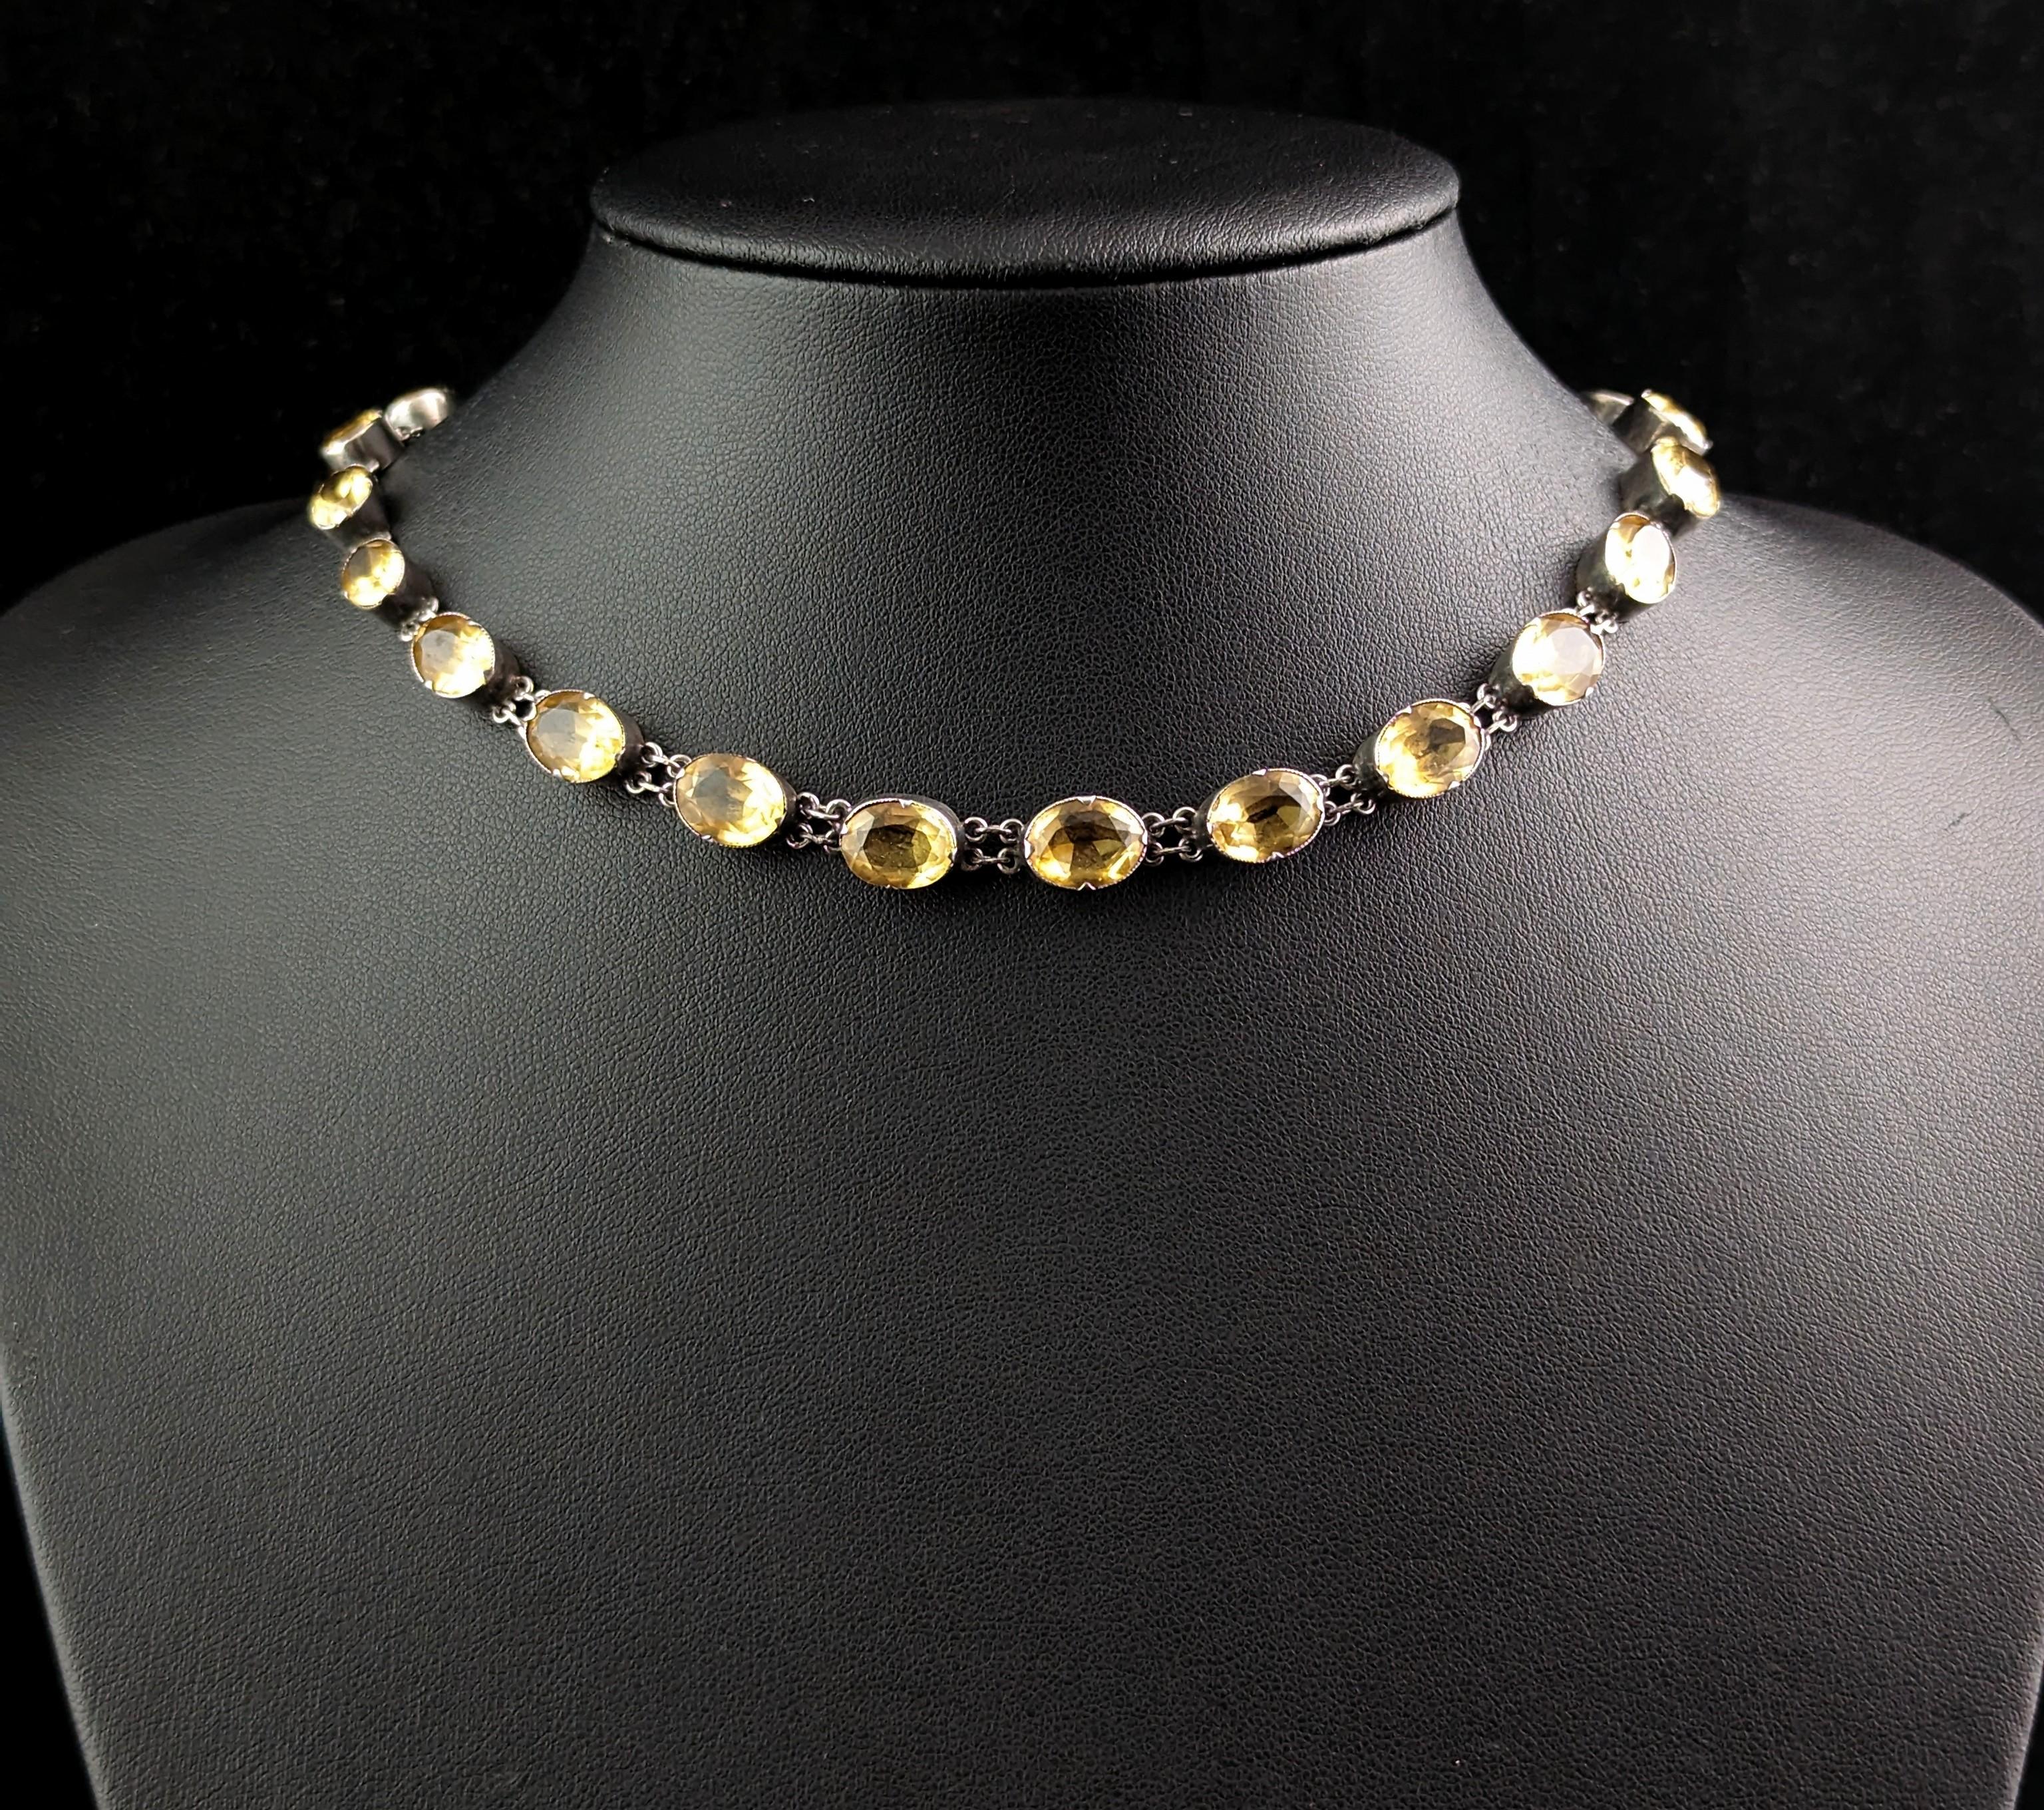 Antique Georgian Citrine Riviere Necklace, Sterling Silver 4